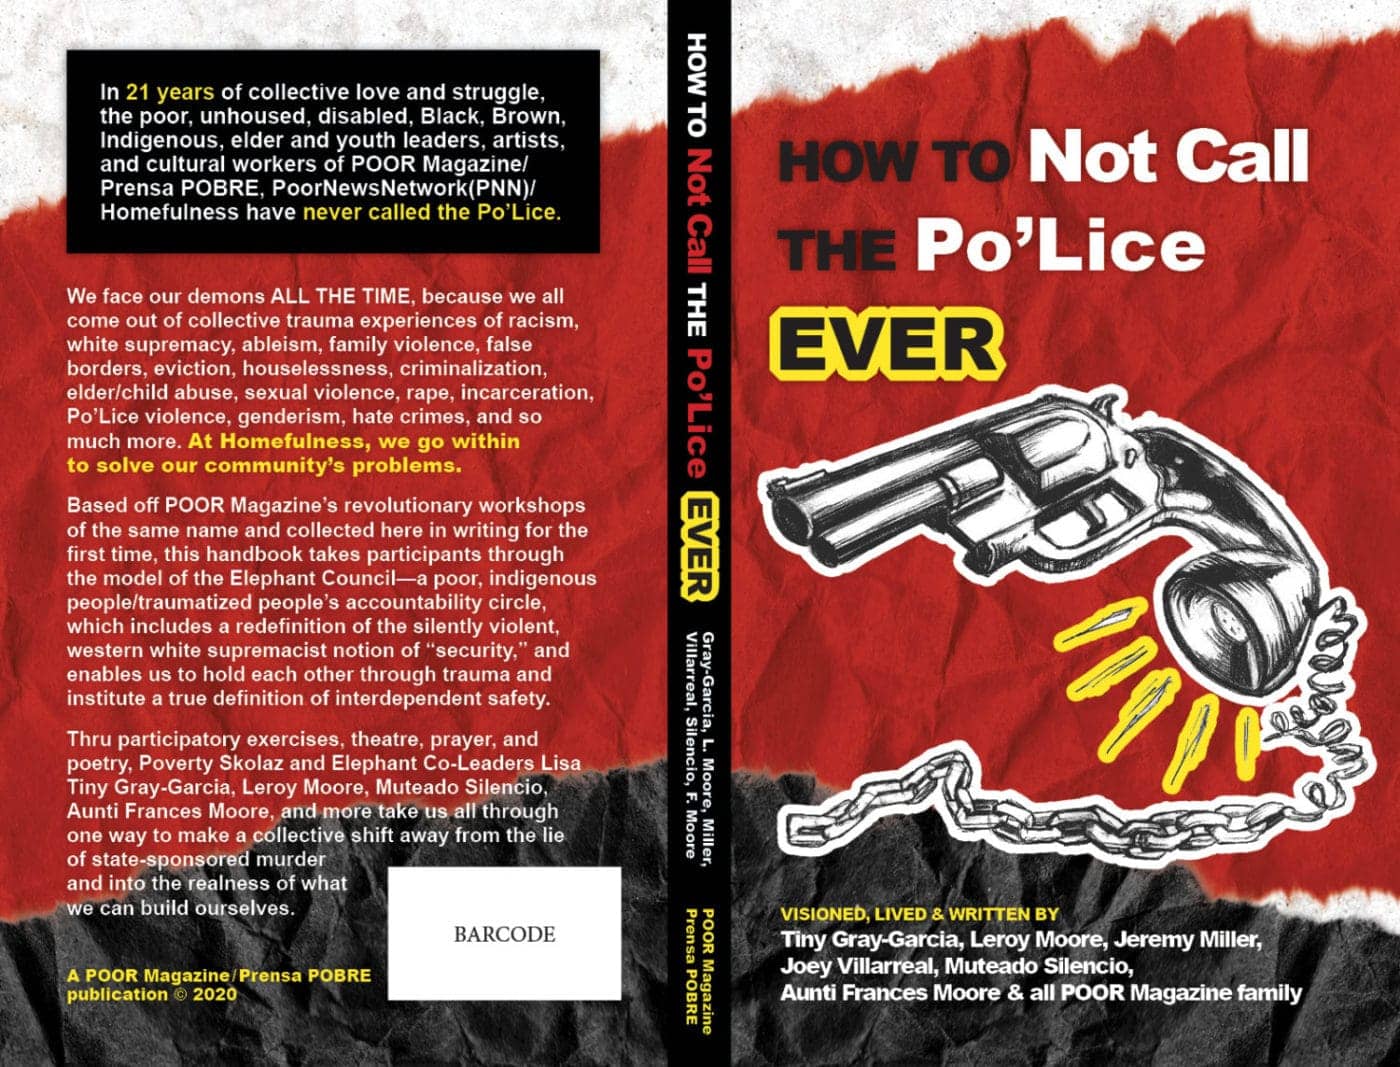 How-To-Not-Call-The-PoLice-Ever-book-cover-1400x1067, <strong>What do the kids have to say about abolition vs. poLice?</strong>, Culture Currents Local News & Views News & Views 